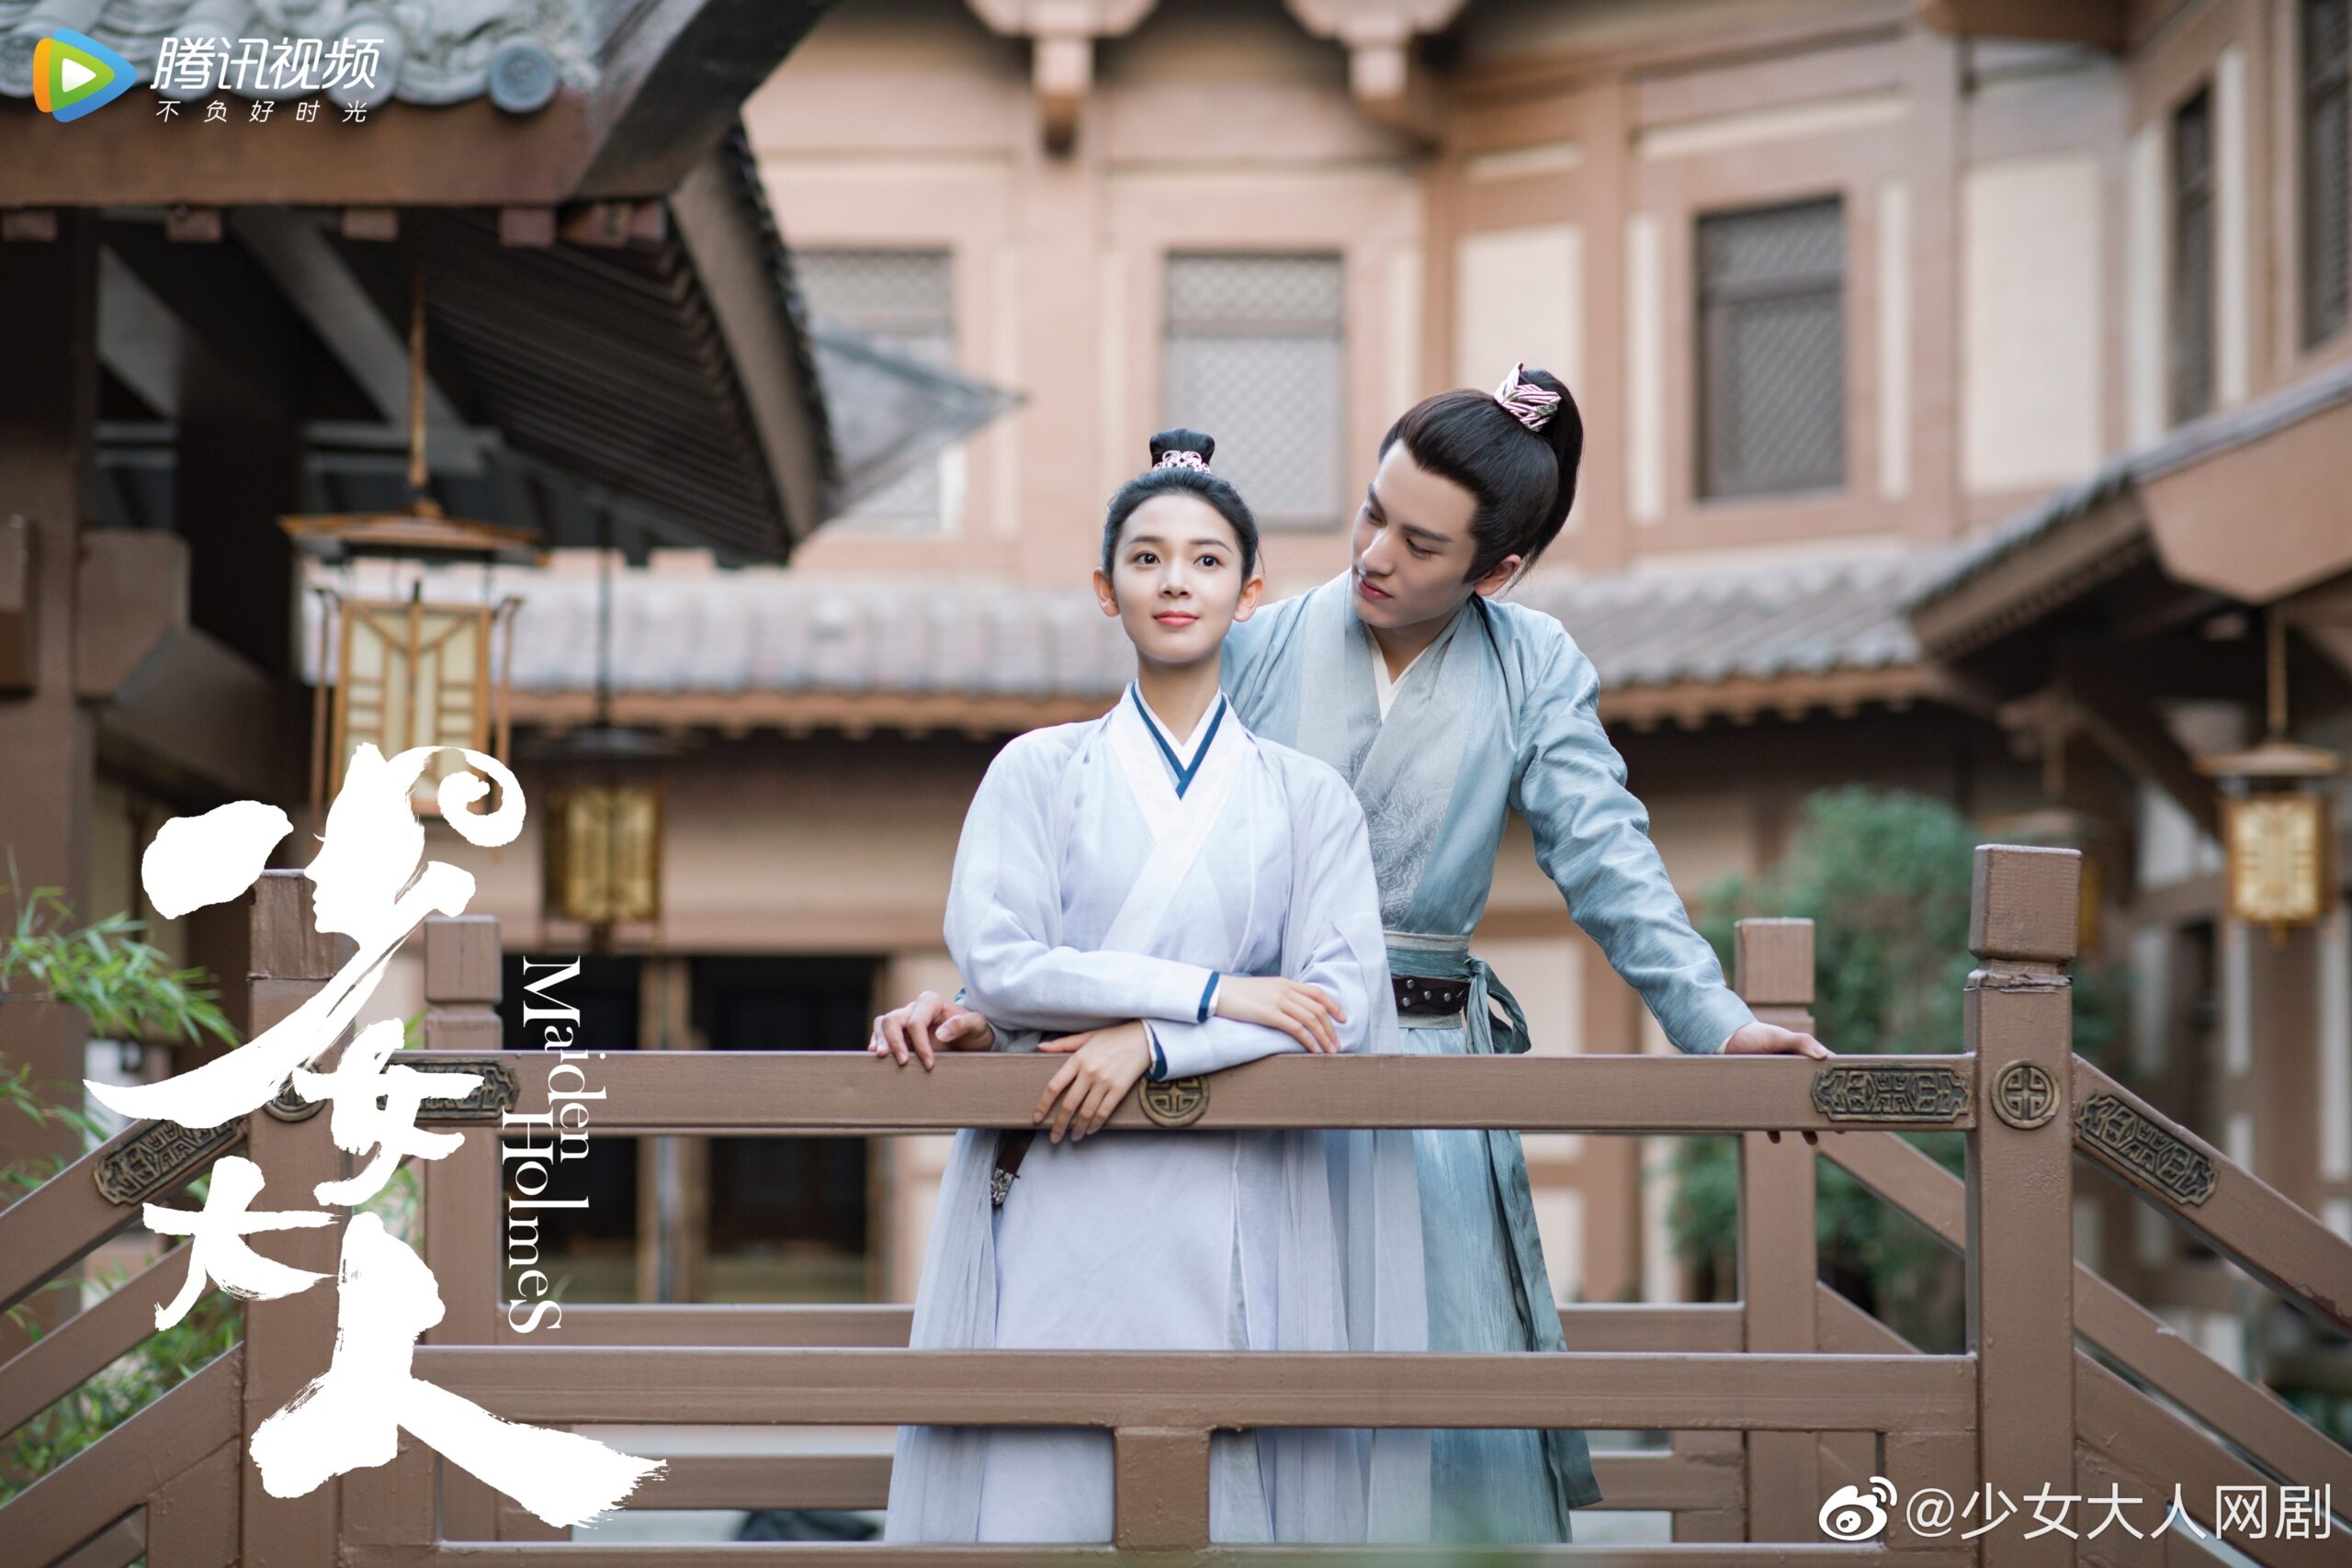 The Chinese ancient costume detective drama “Maiden Holmes” has achieved good results at home and abroad